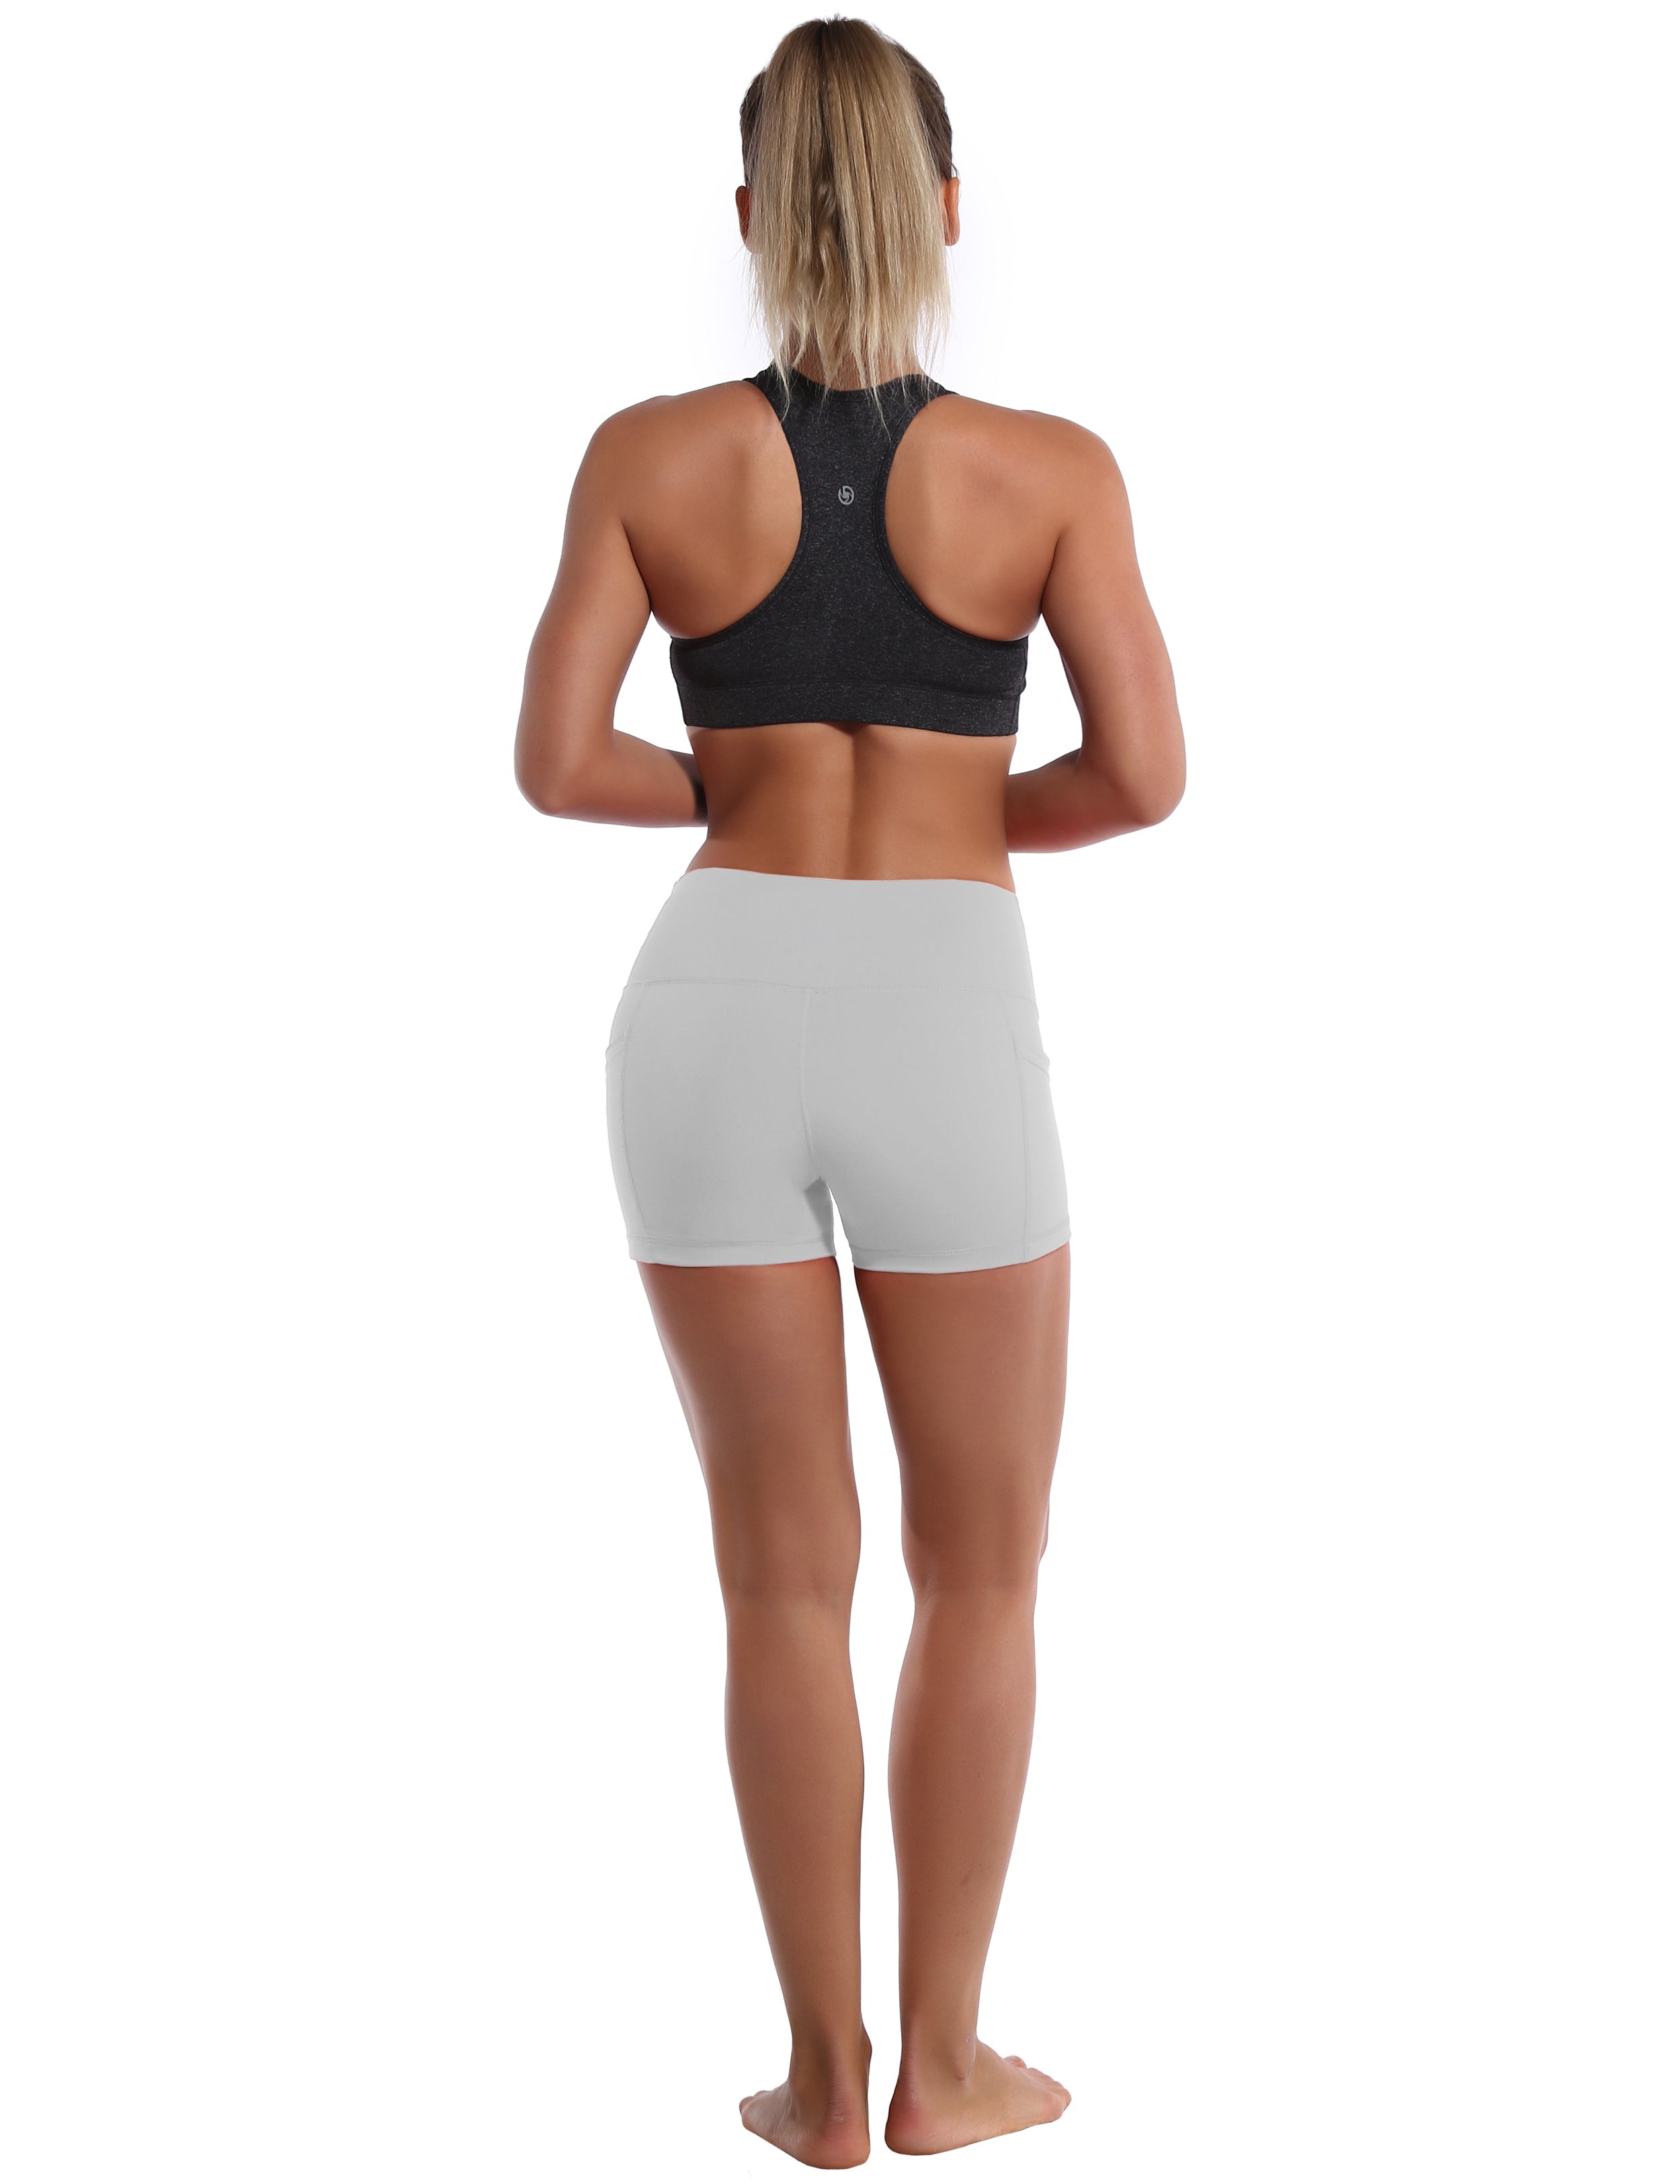 2.5" Side Pockets Biking Shorts lightgray Sleek, soft, smooth and totally comfortable: our newest sexy style is here. Softest-ever fabric High elasticity High density 4-way stretch Fabric doesn't attract lint easily No see-through Moisture-wicking Machine wash 78% Polyester, 22% Spandex